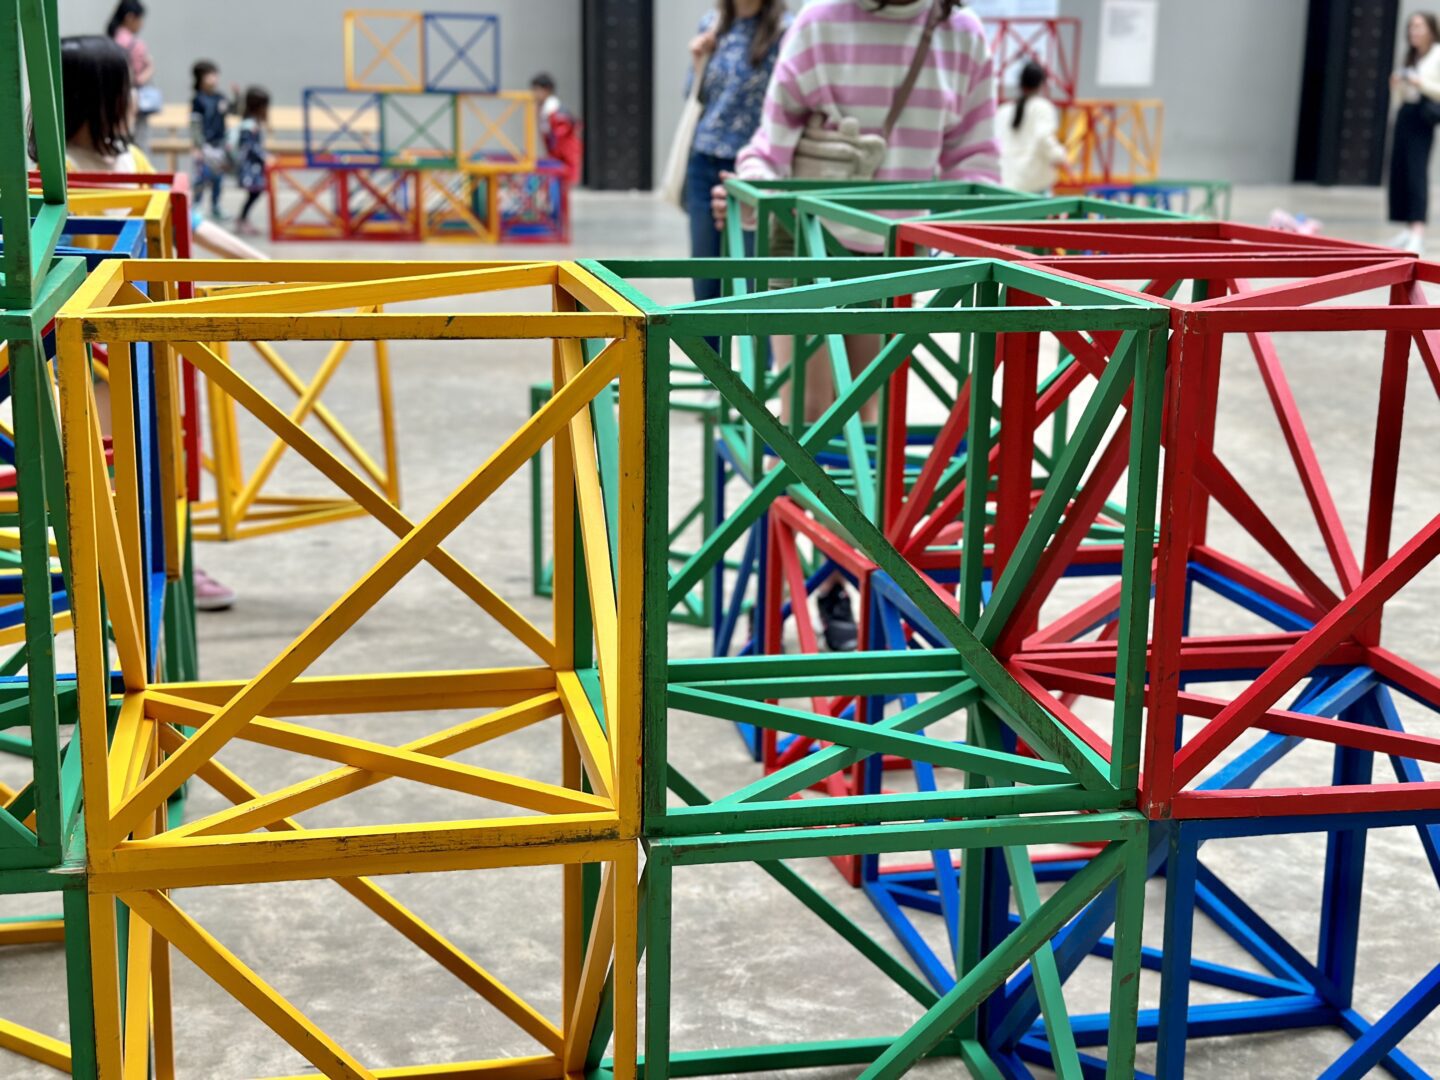 Zero to infinity - brightly coloured cubes of art